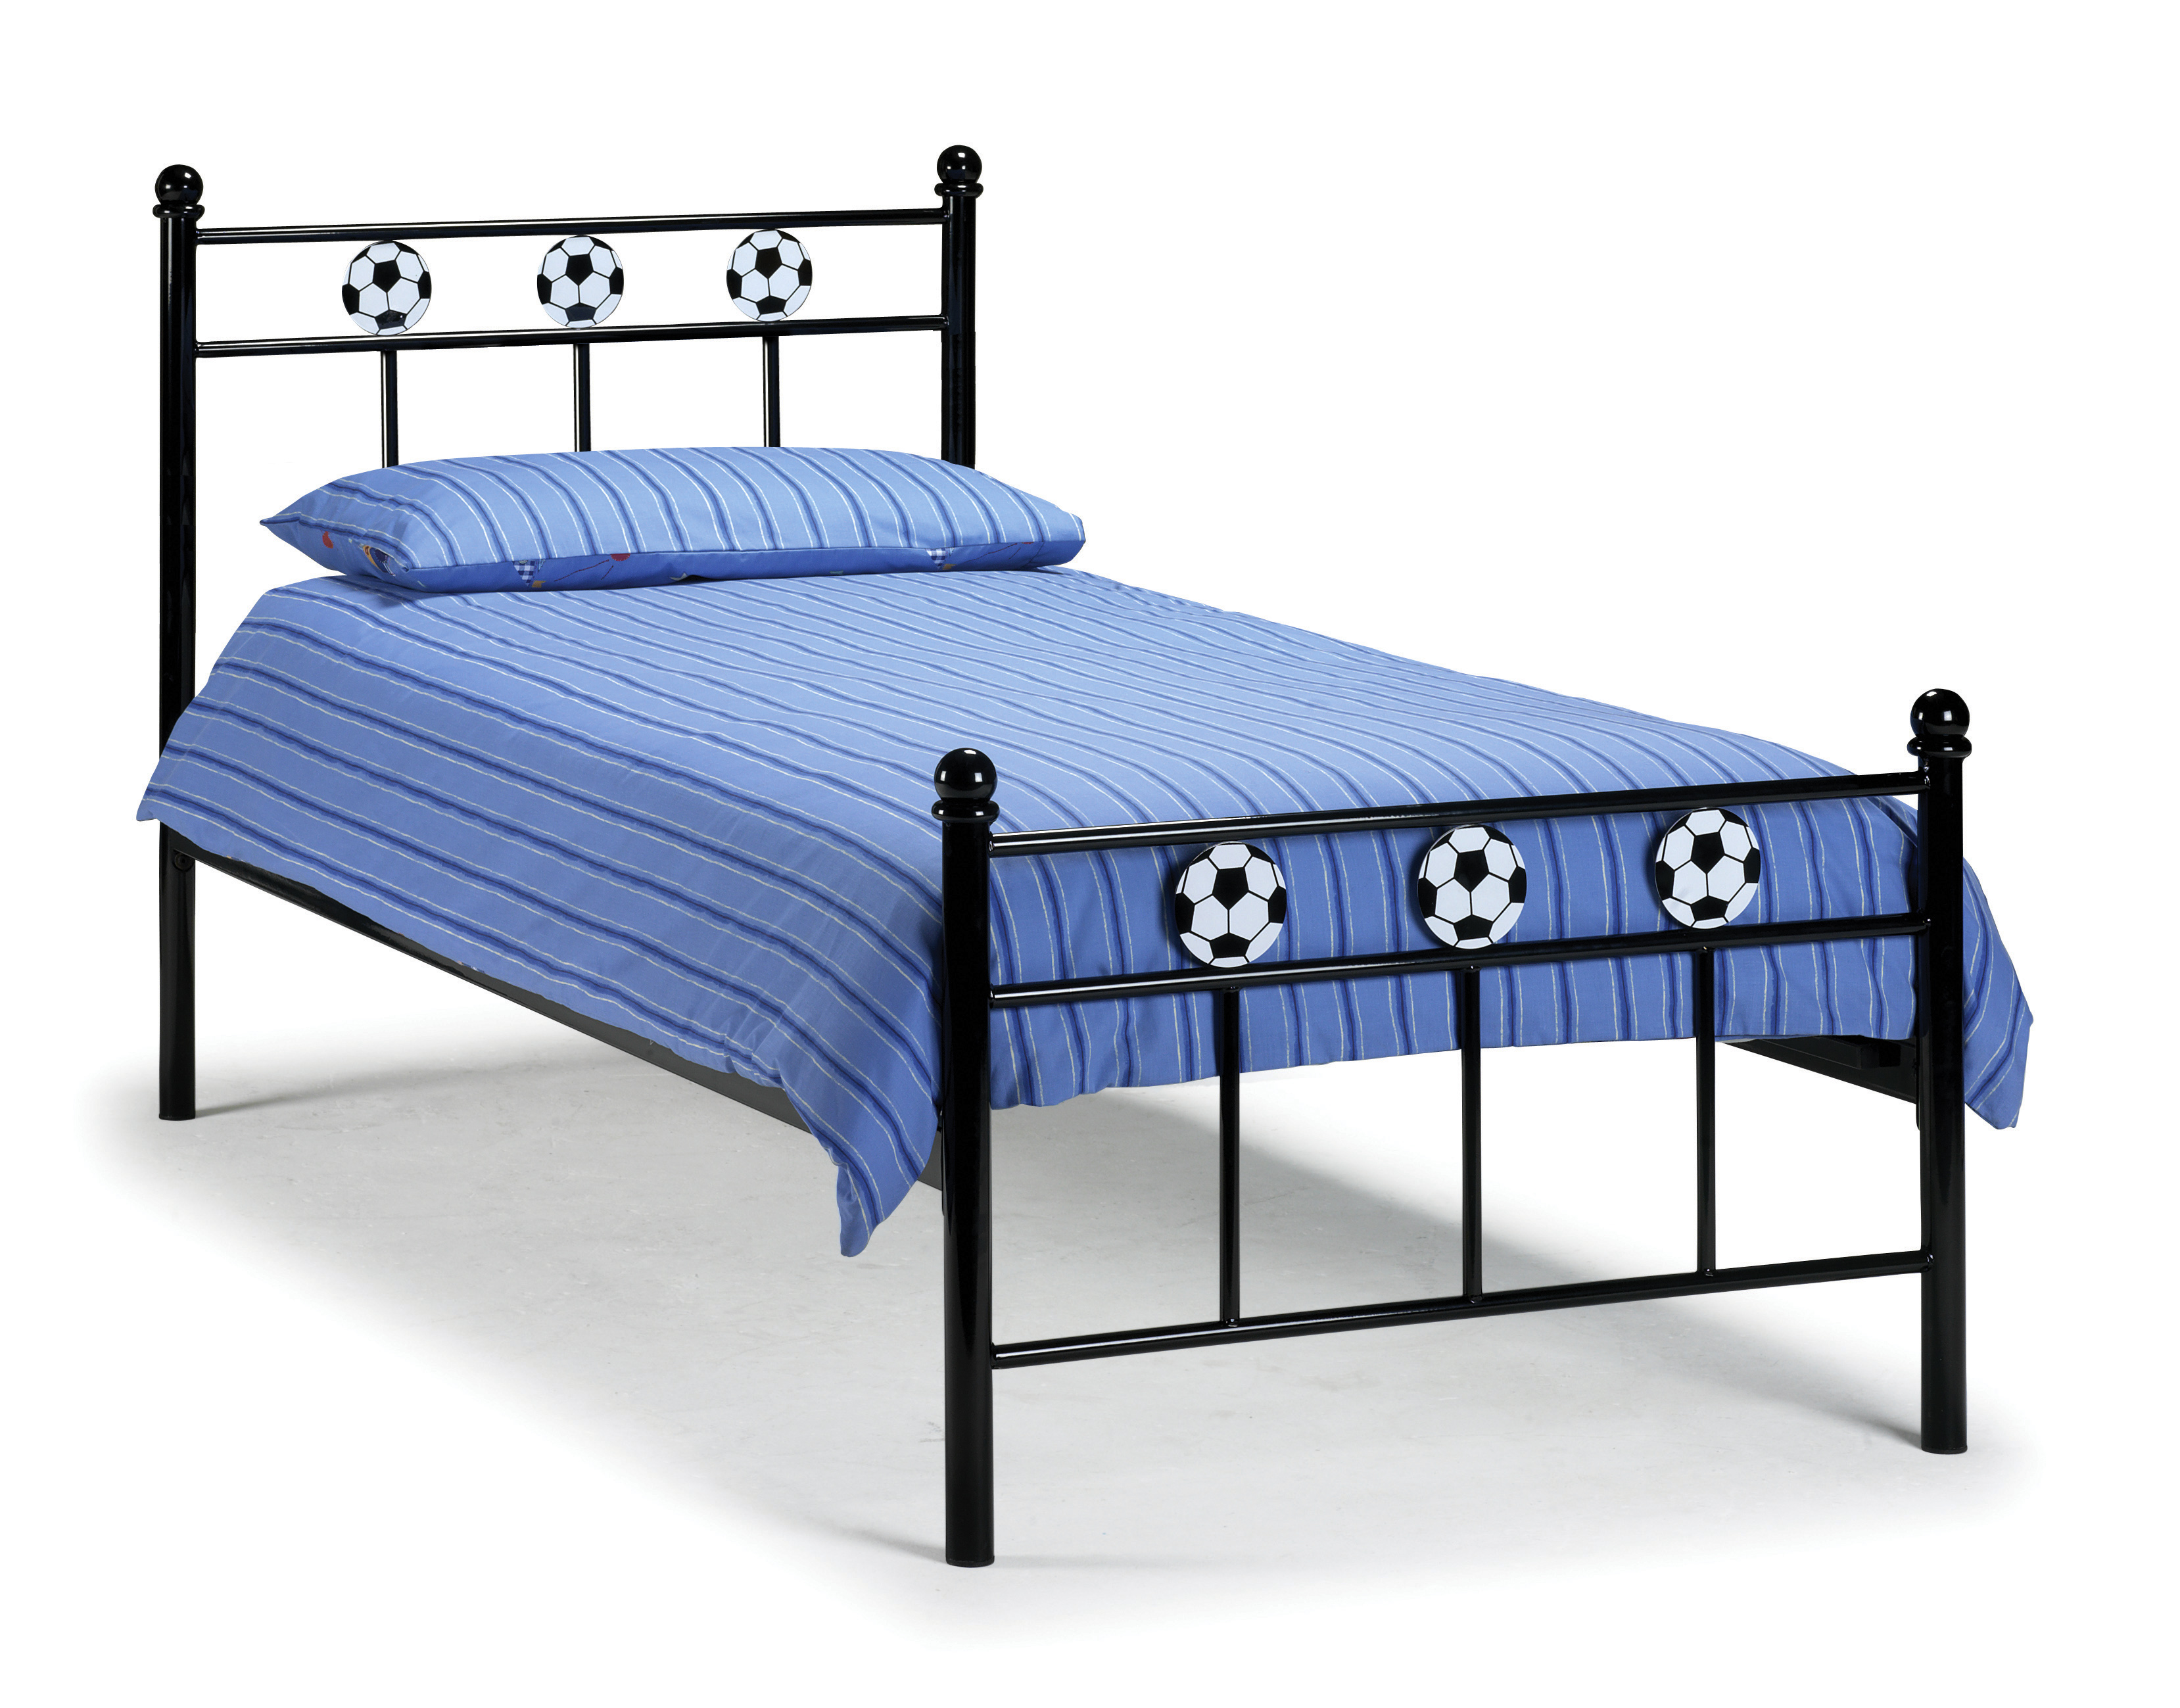 Football bed